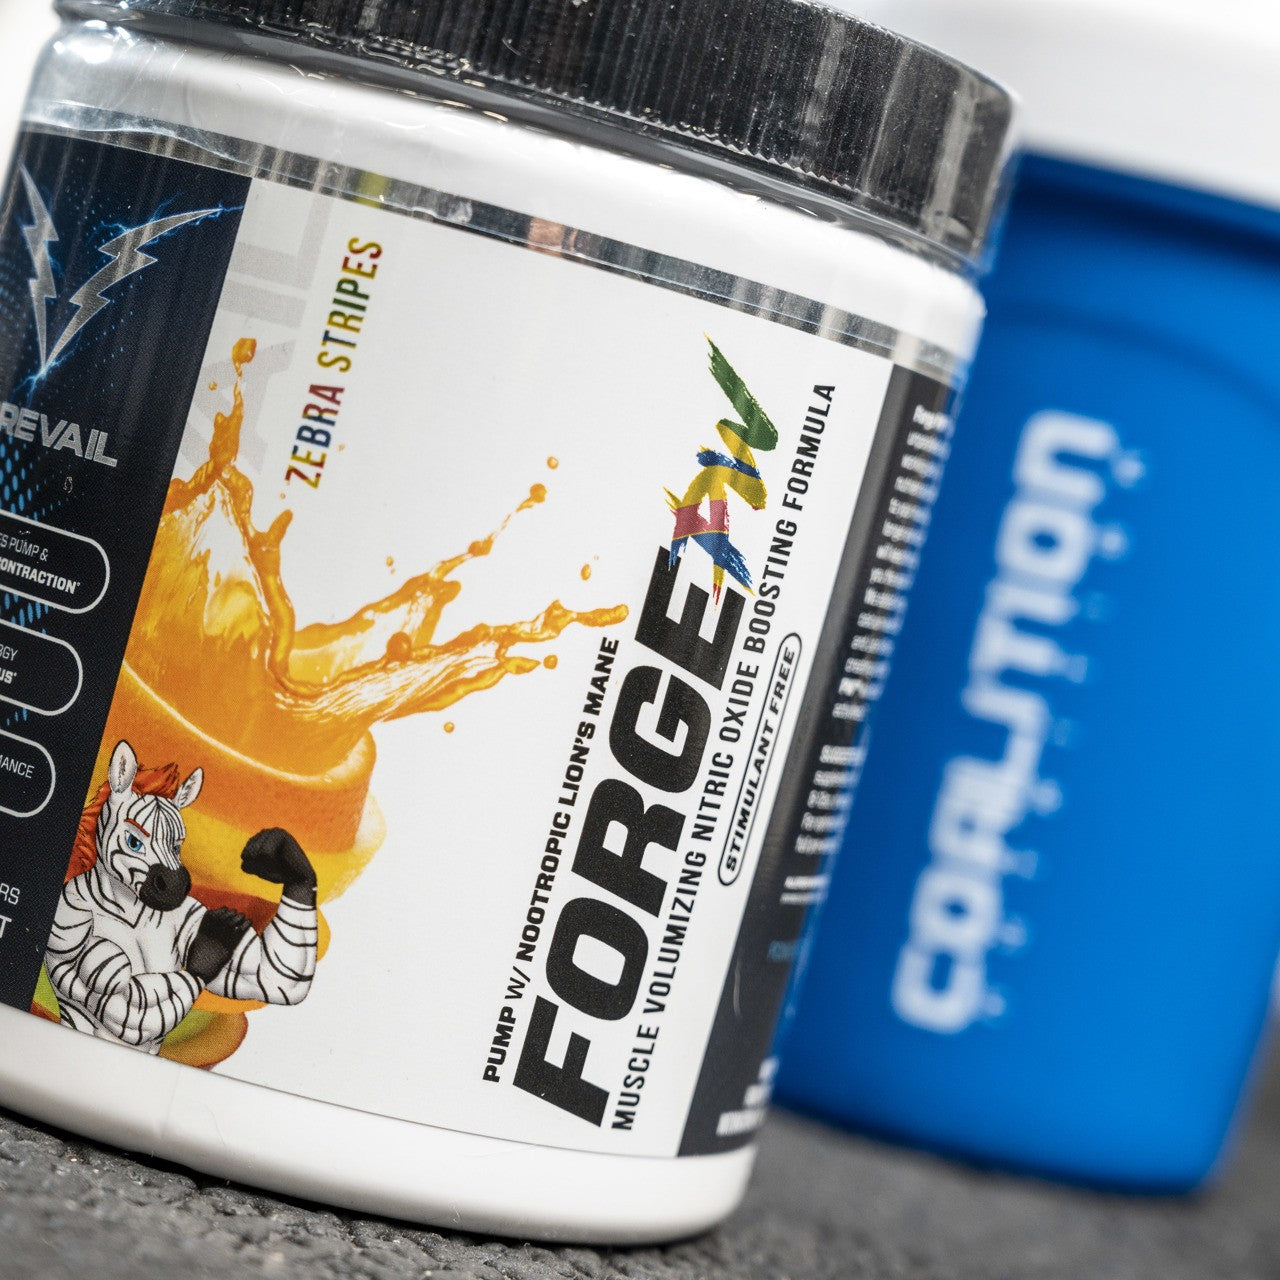 Zebra Stripes I-Prevail Supplements Forge PW Coalition Nutrition